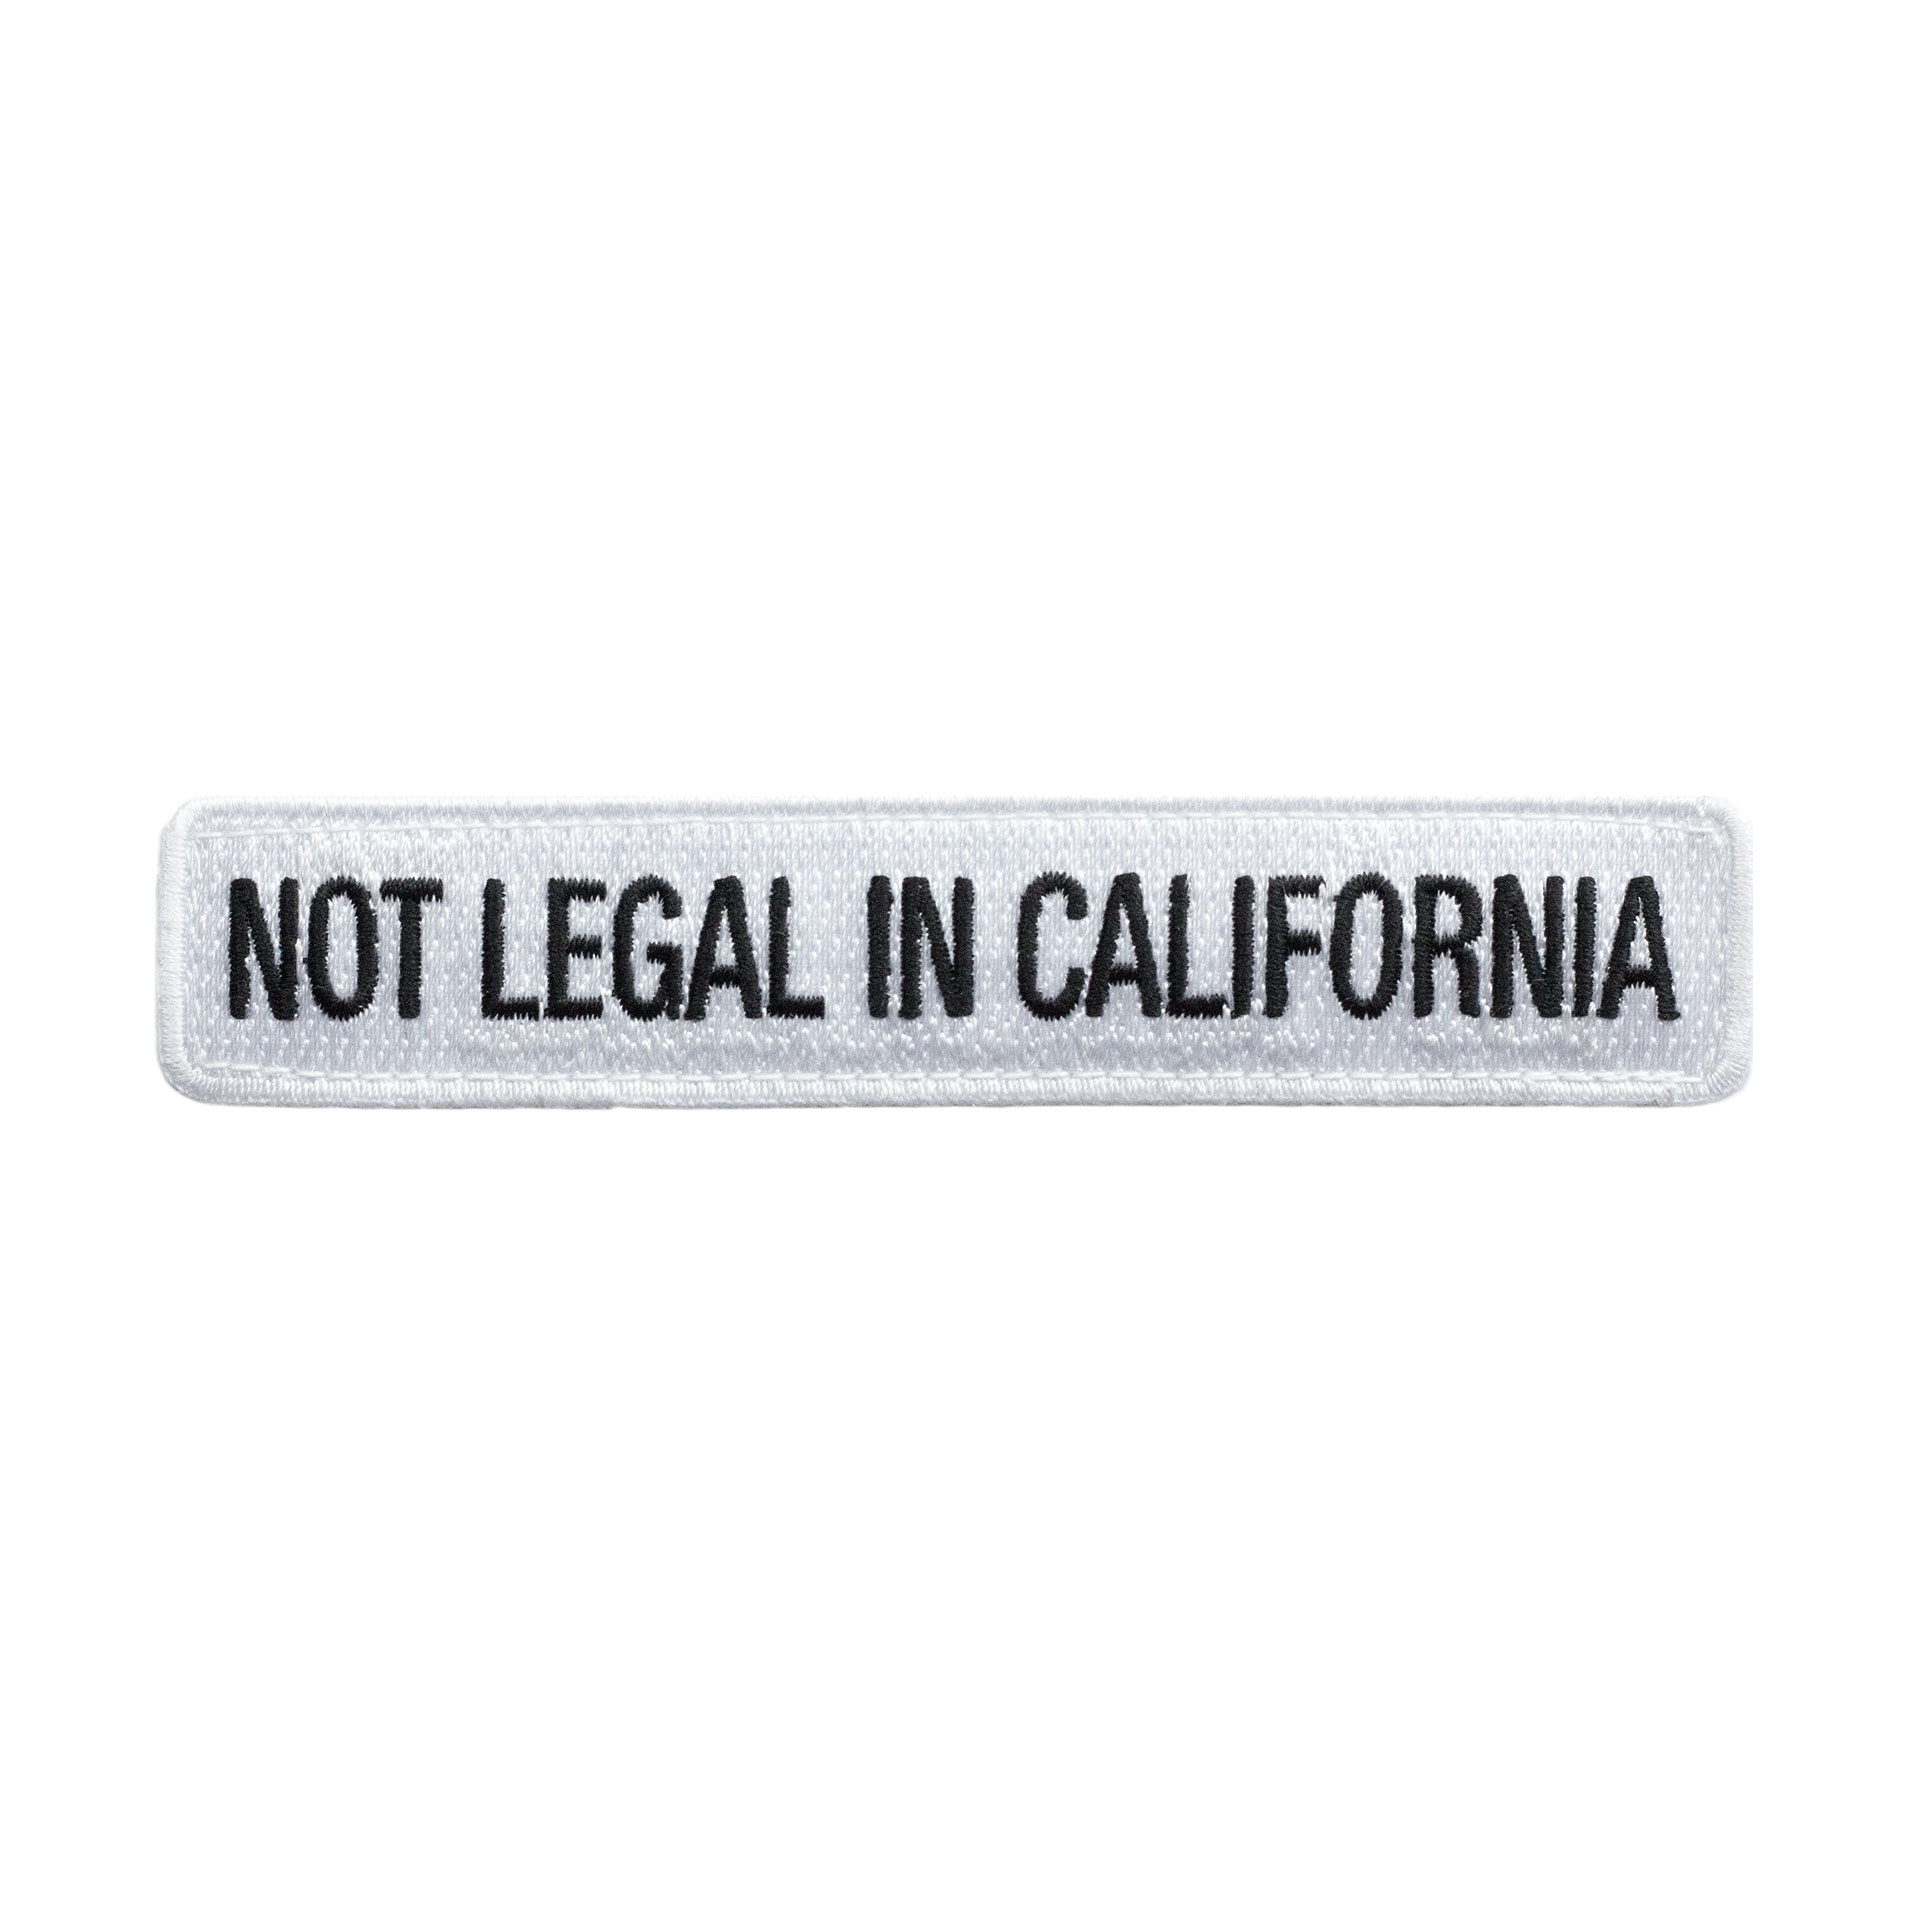 Not Legal In California Morale Patch